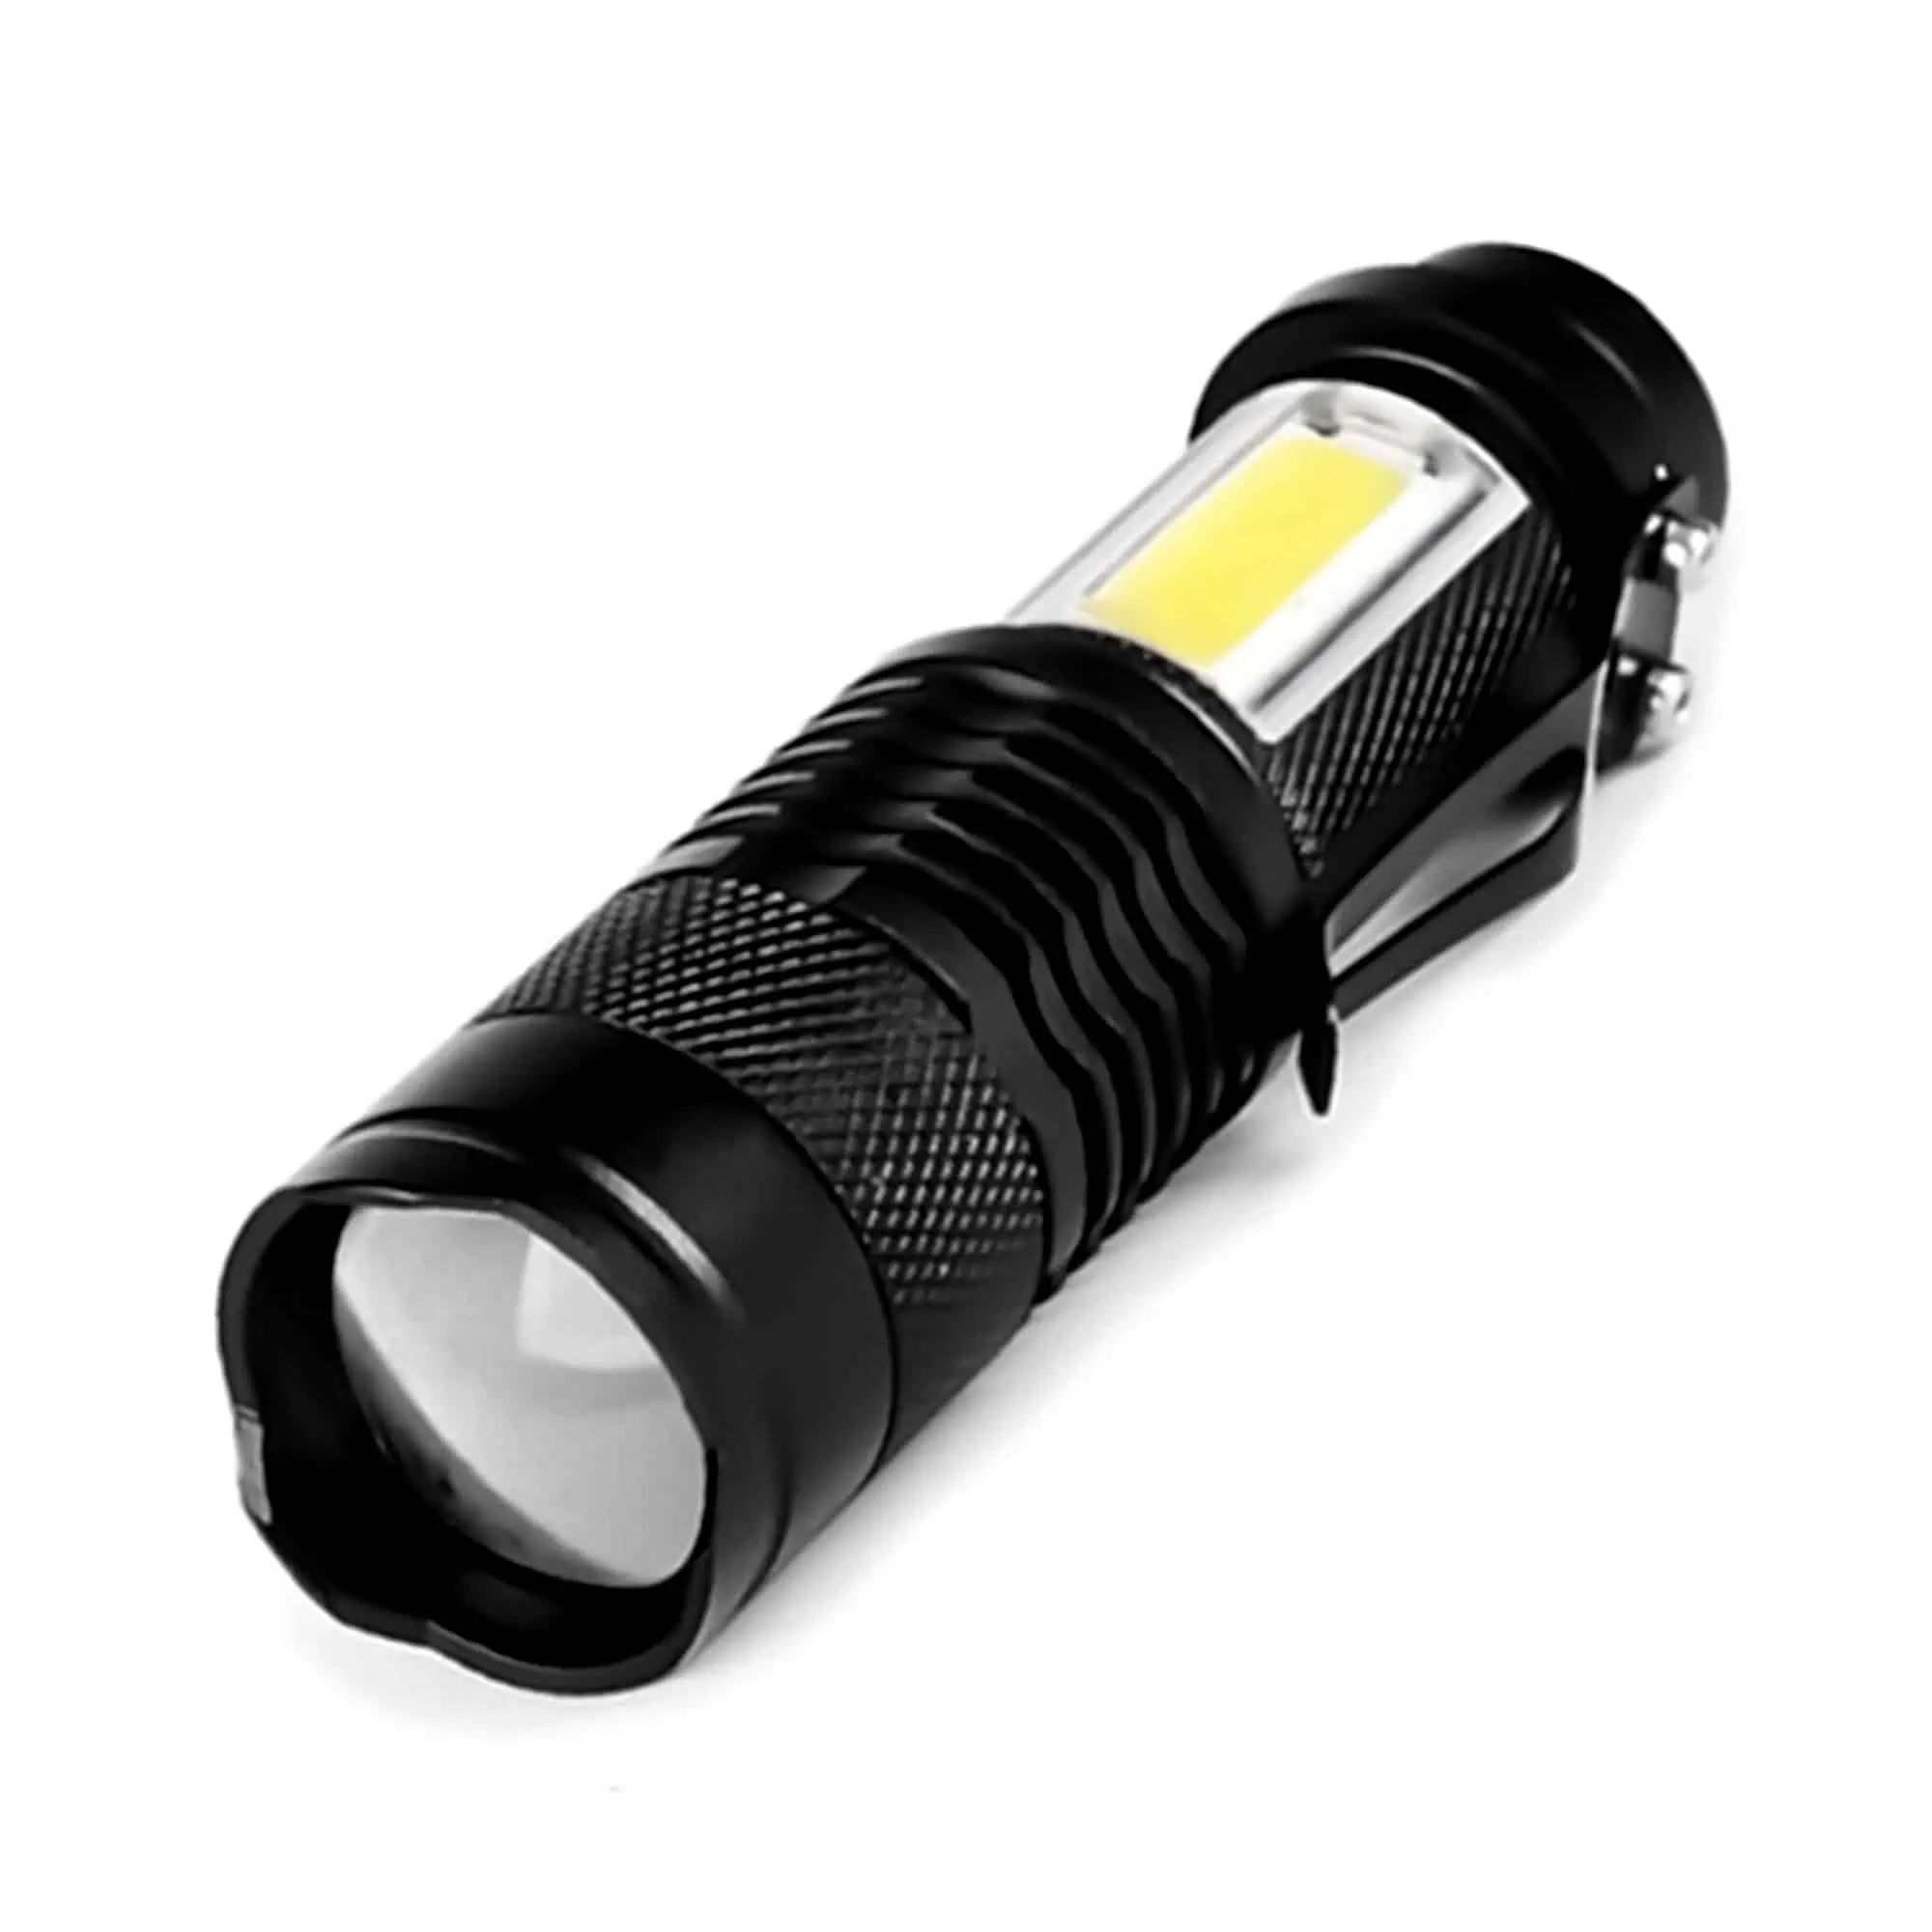 Torche rechargeable USB COB Mador - Nos lampes torches